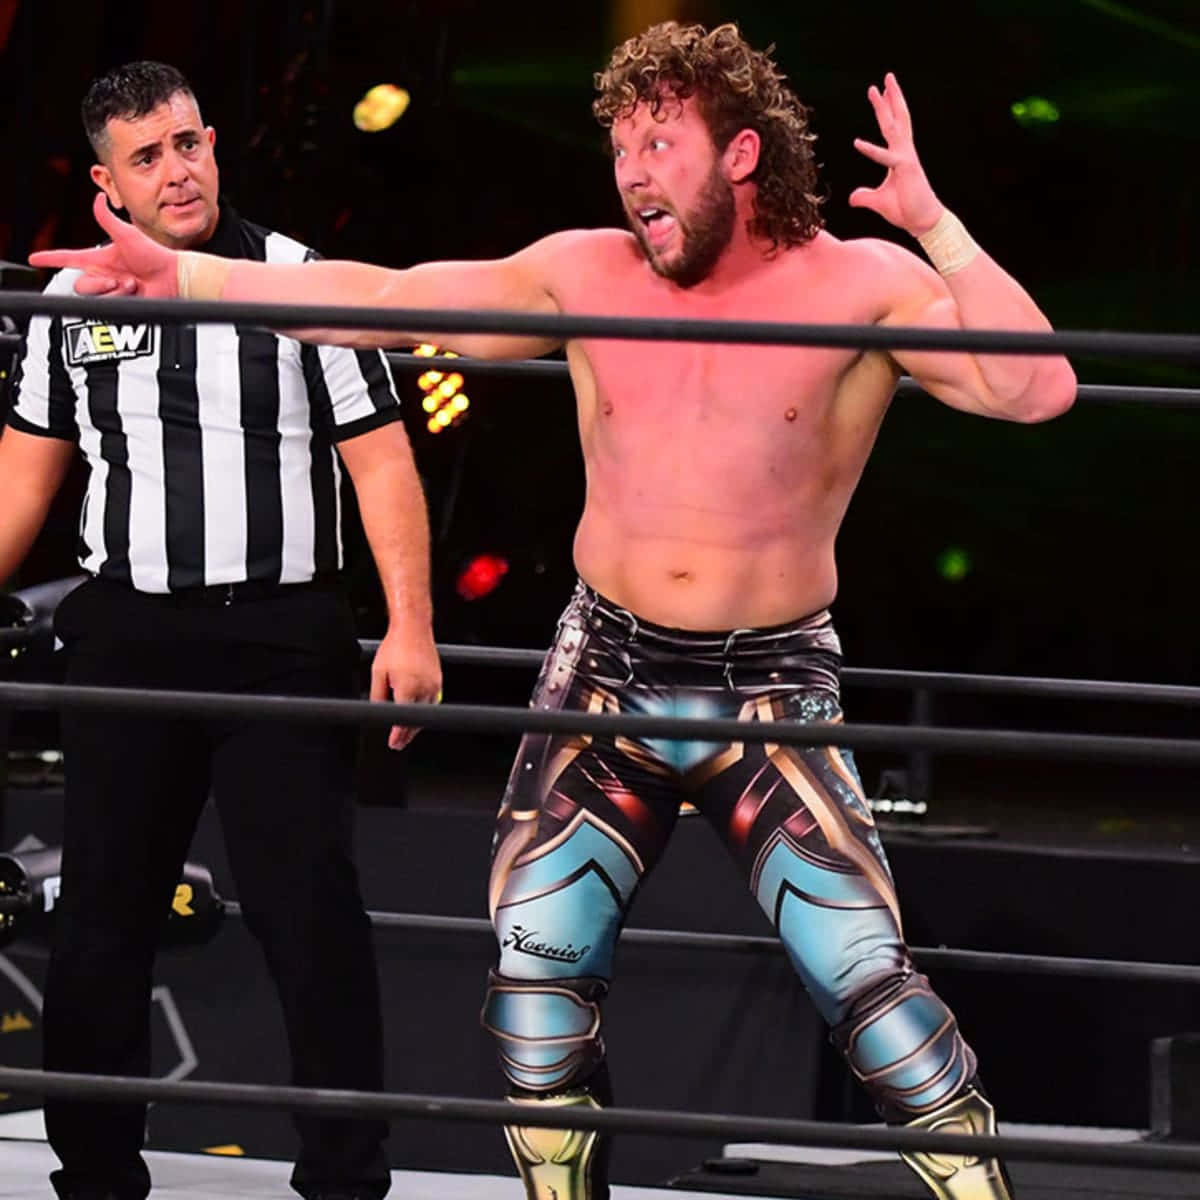 Kenny Omega, The Renowned Canadian Pro Wrestler, In A Pose With Referee Wallpaper